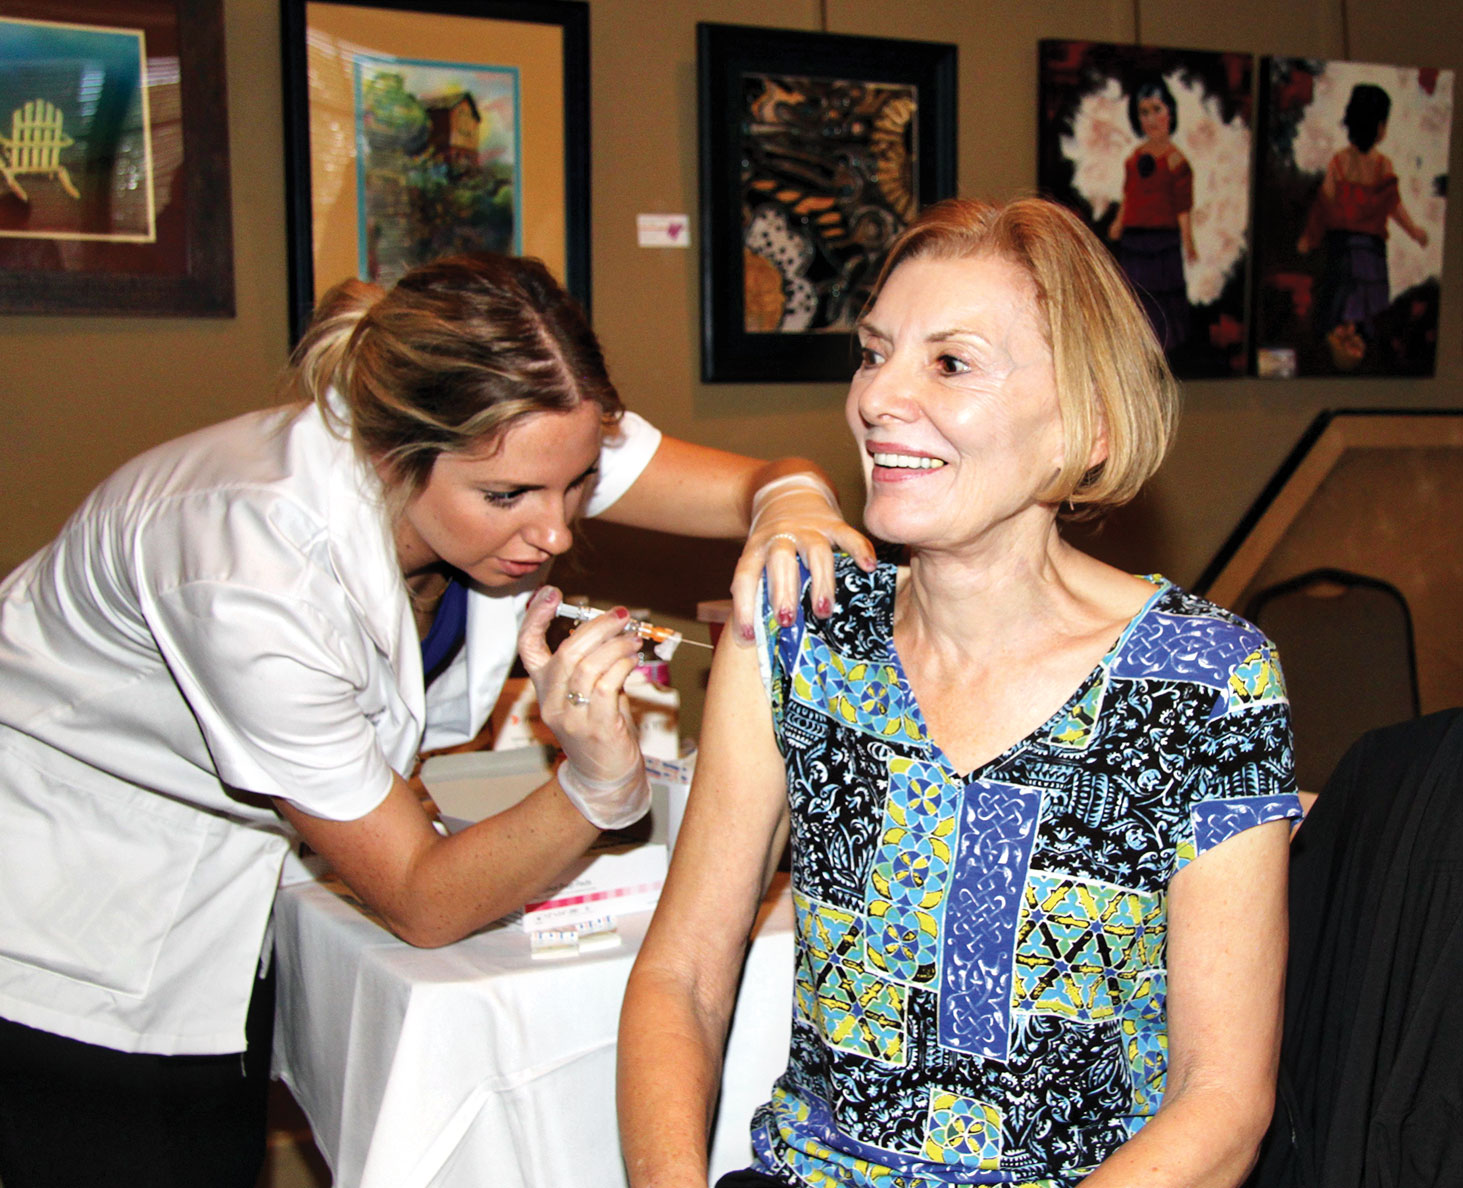 Immunizations are always a busy activity at the Health Fair.